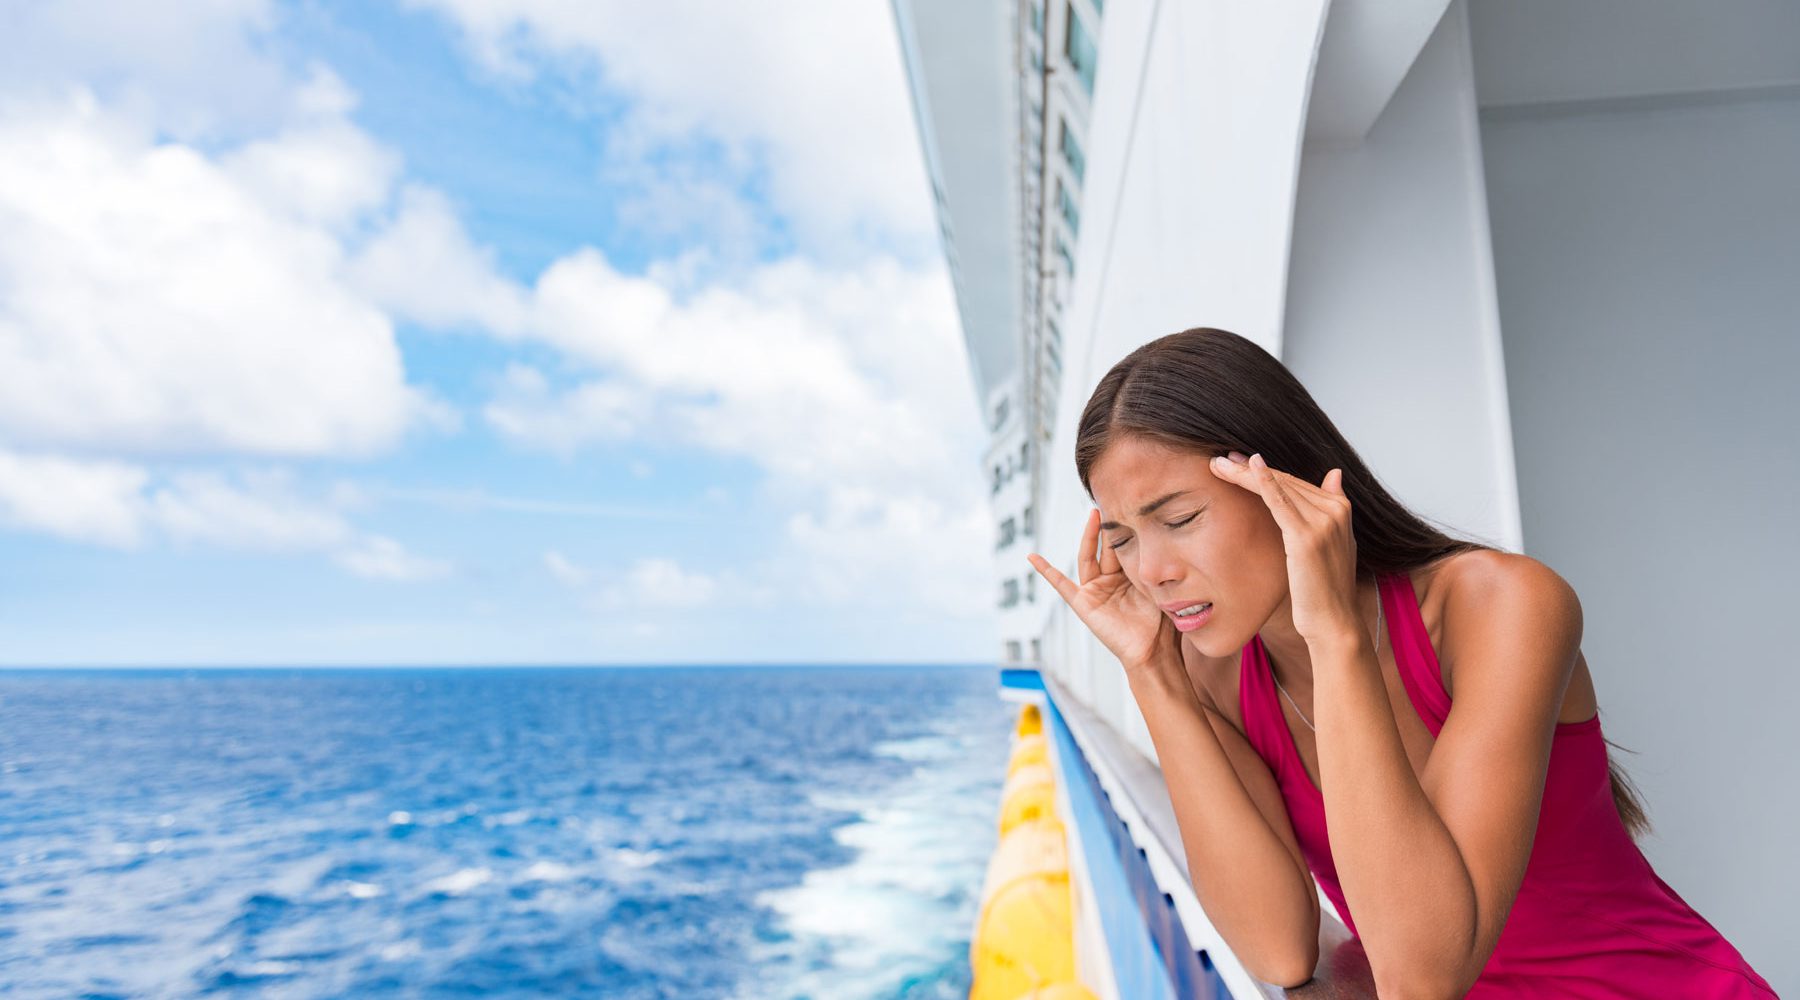 Read some health tips to avoid getting sick on a cruise ship